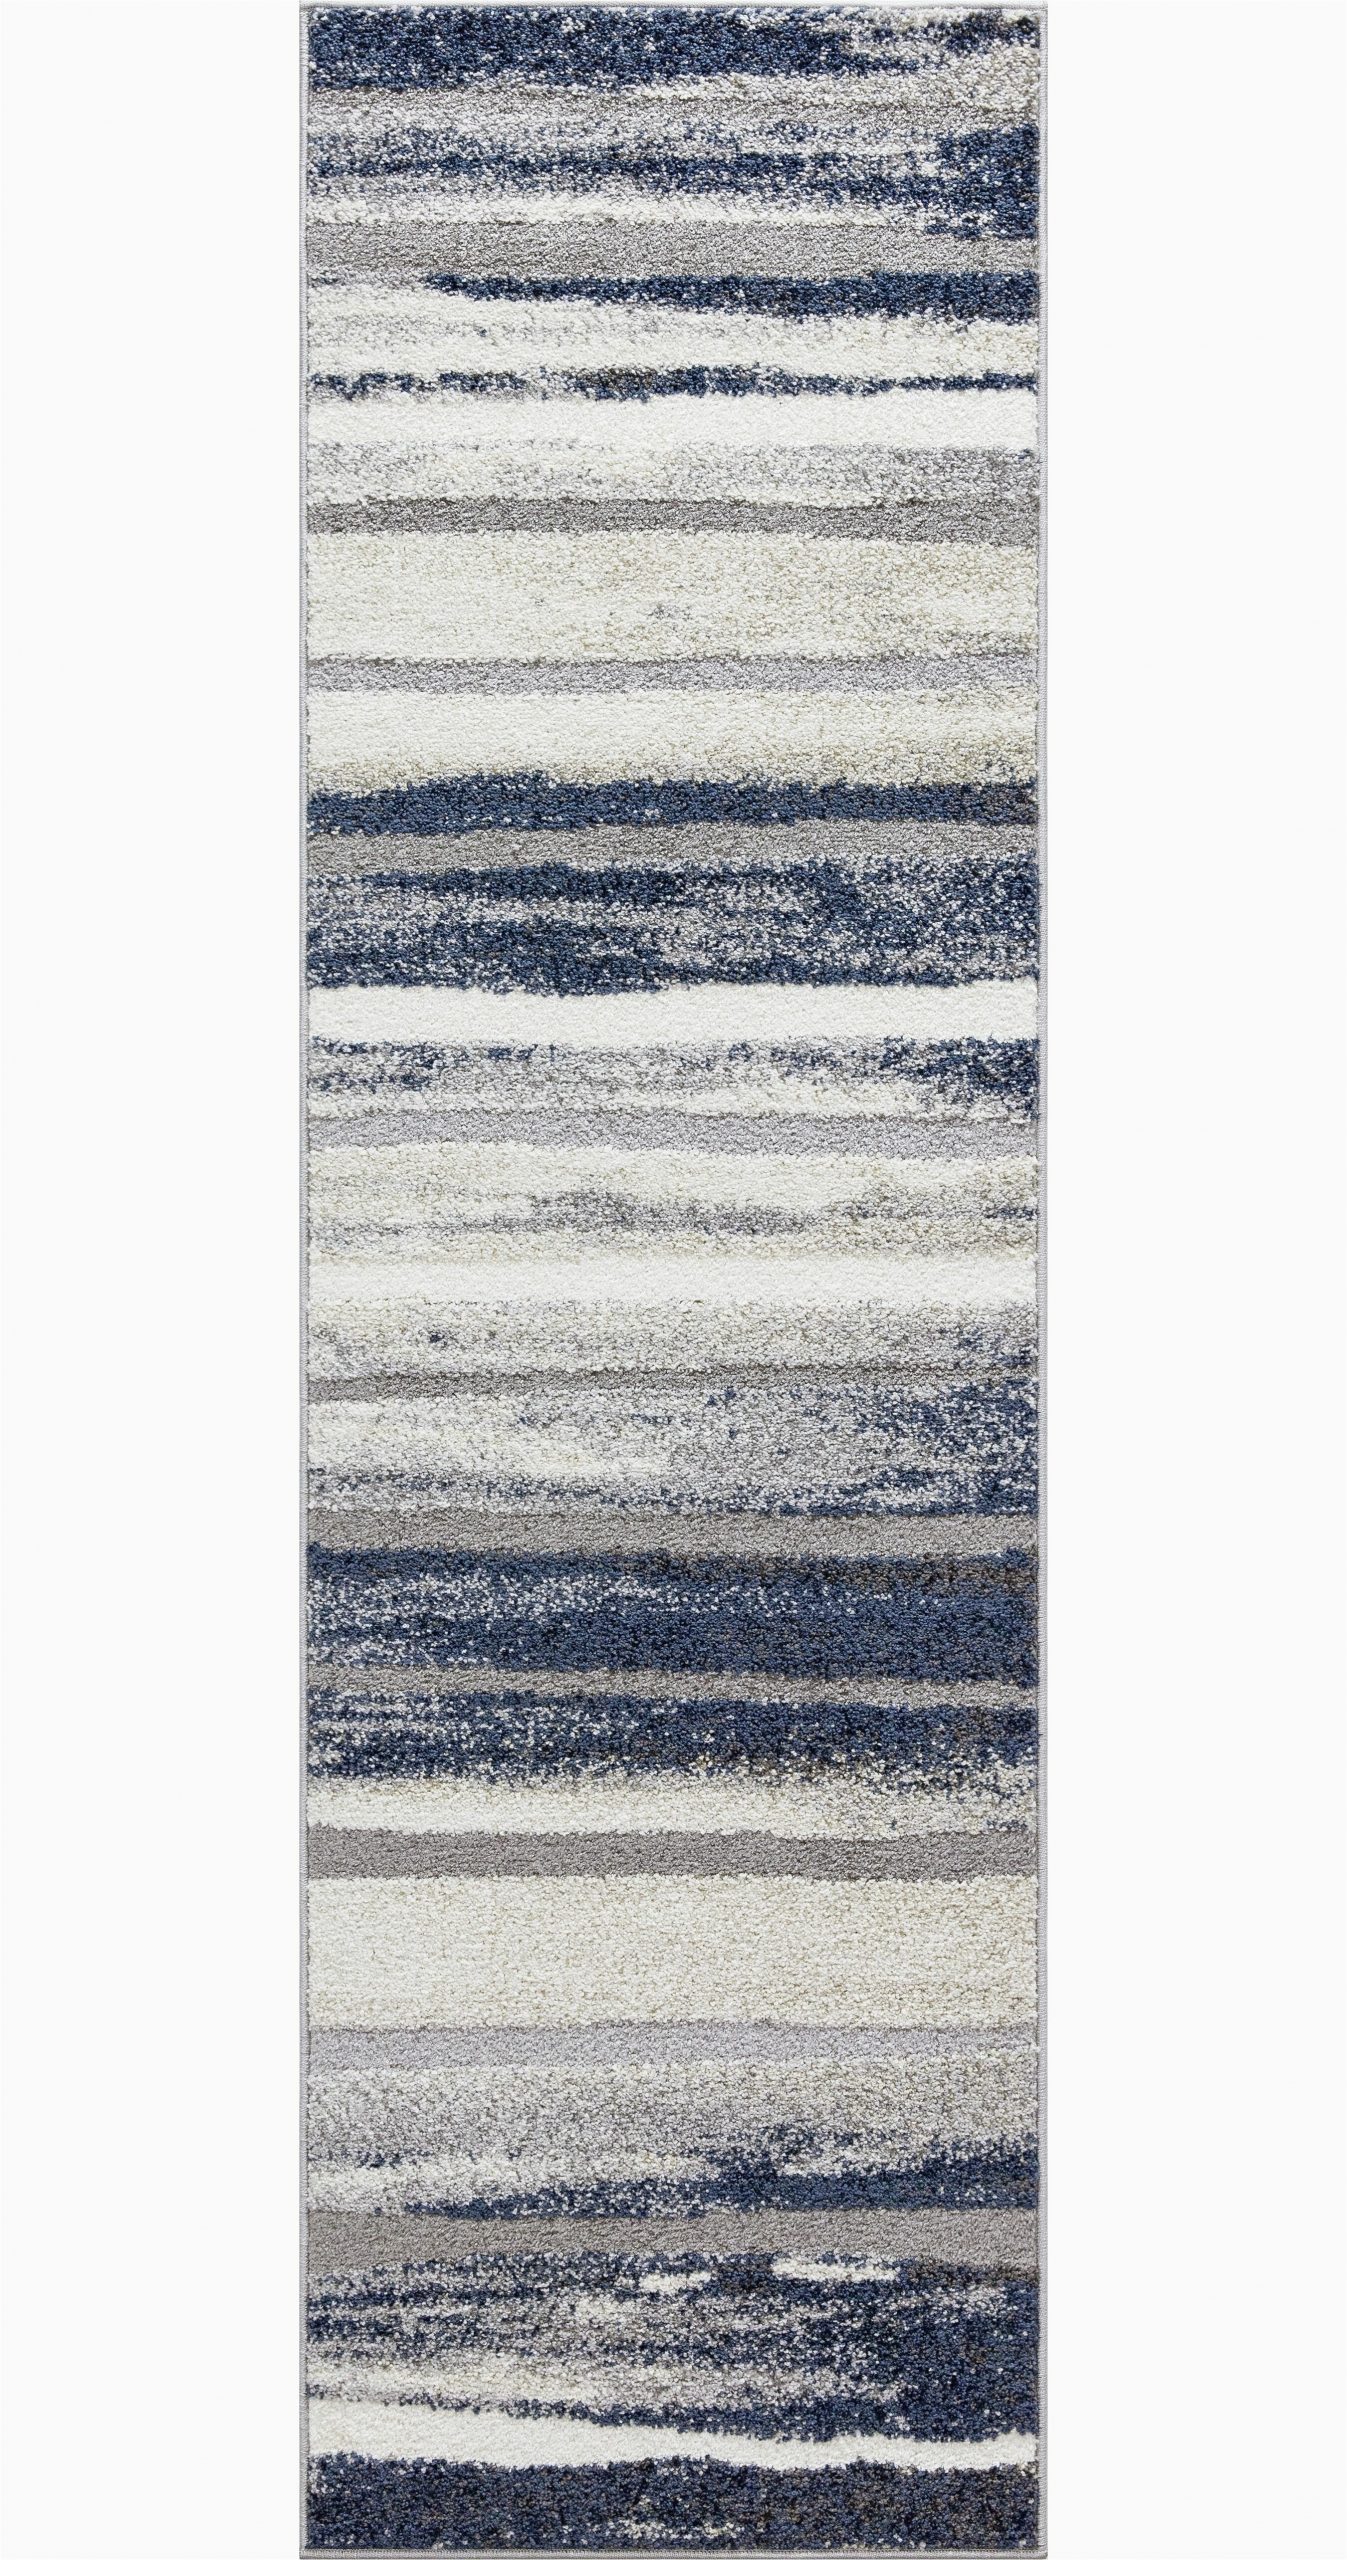 Blue and Gray Throw Rugs Roseman Striped Blue Gray area Rug